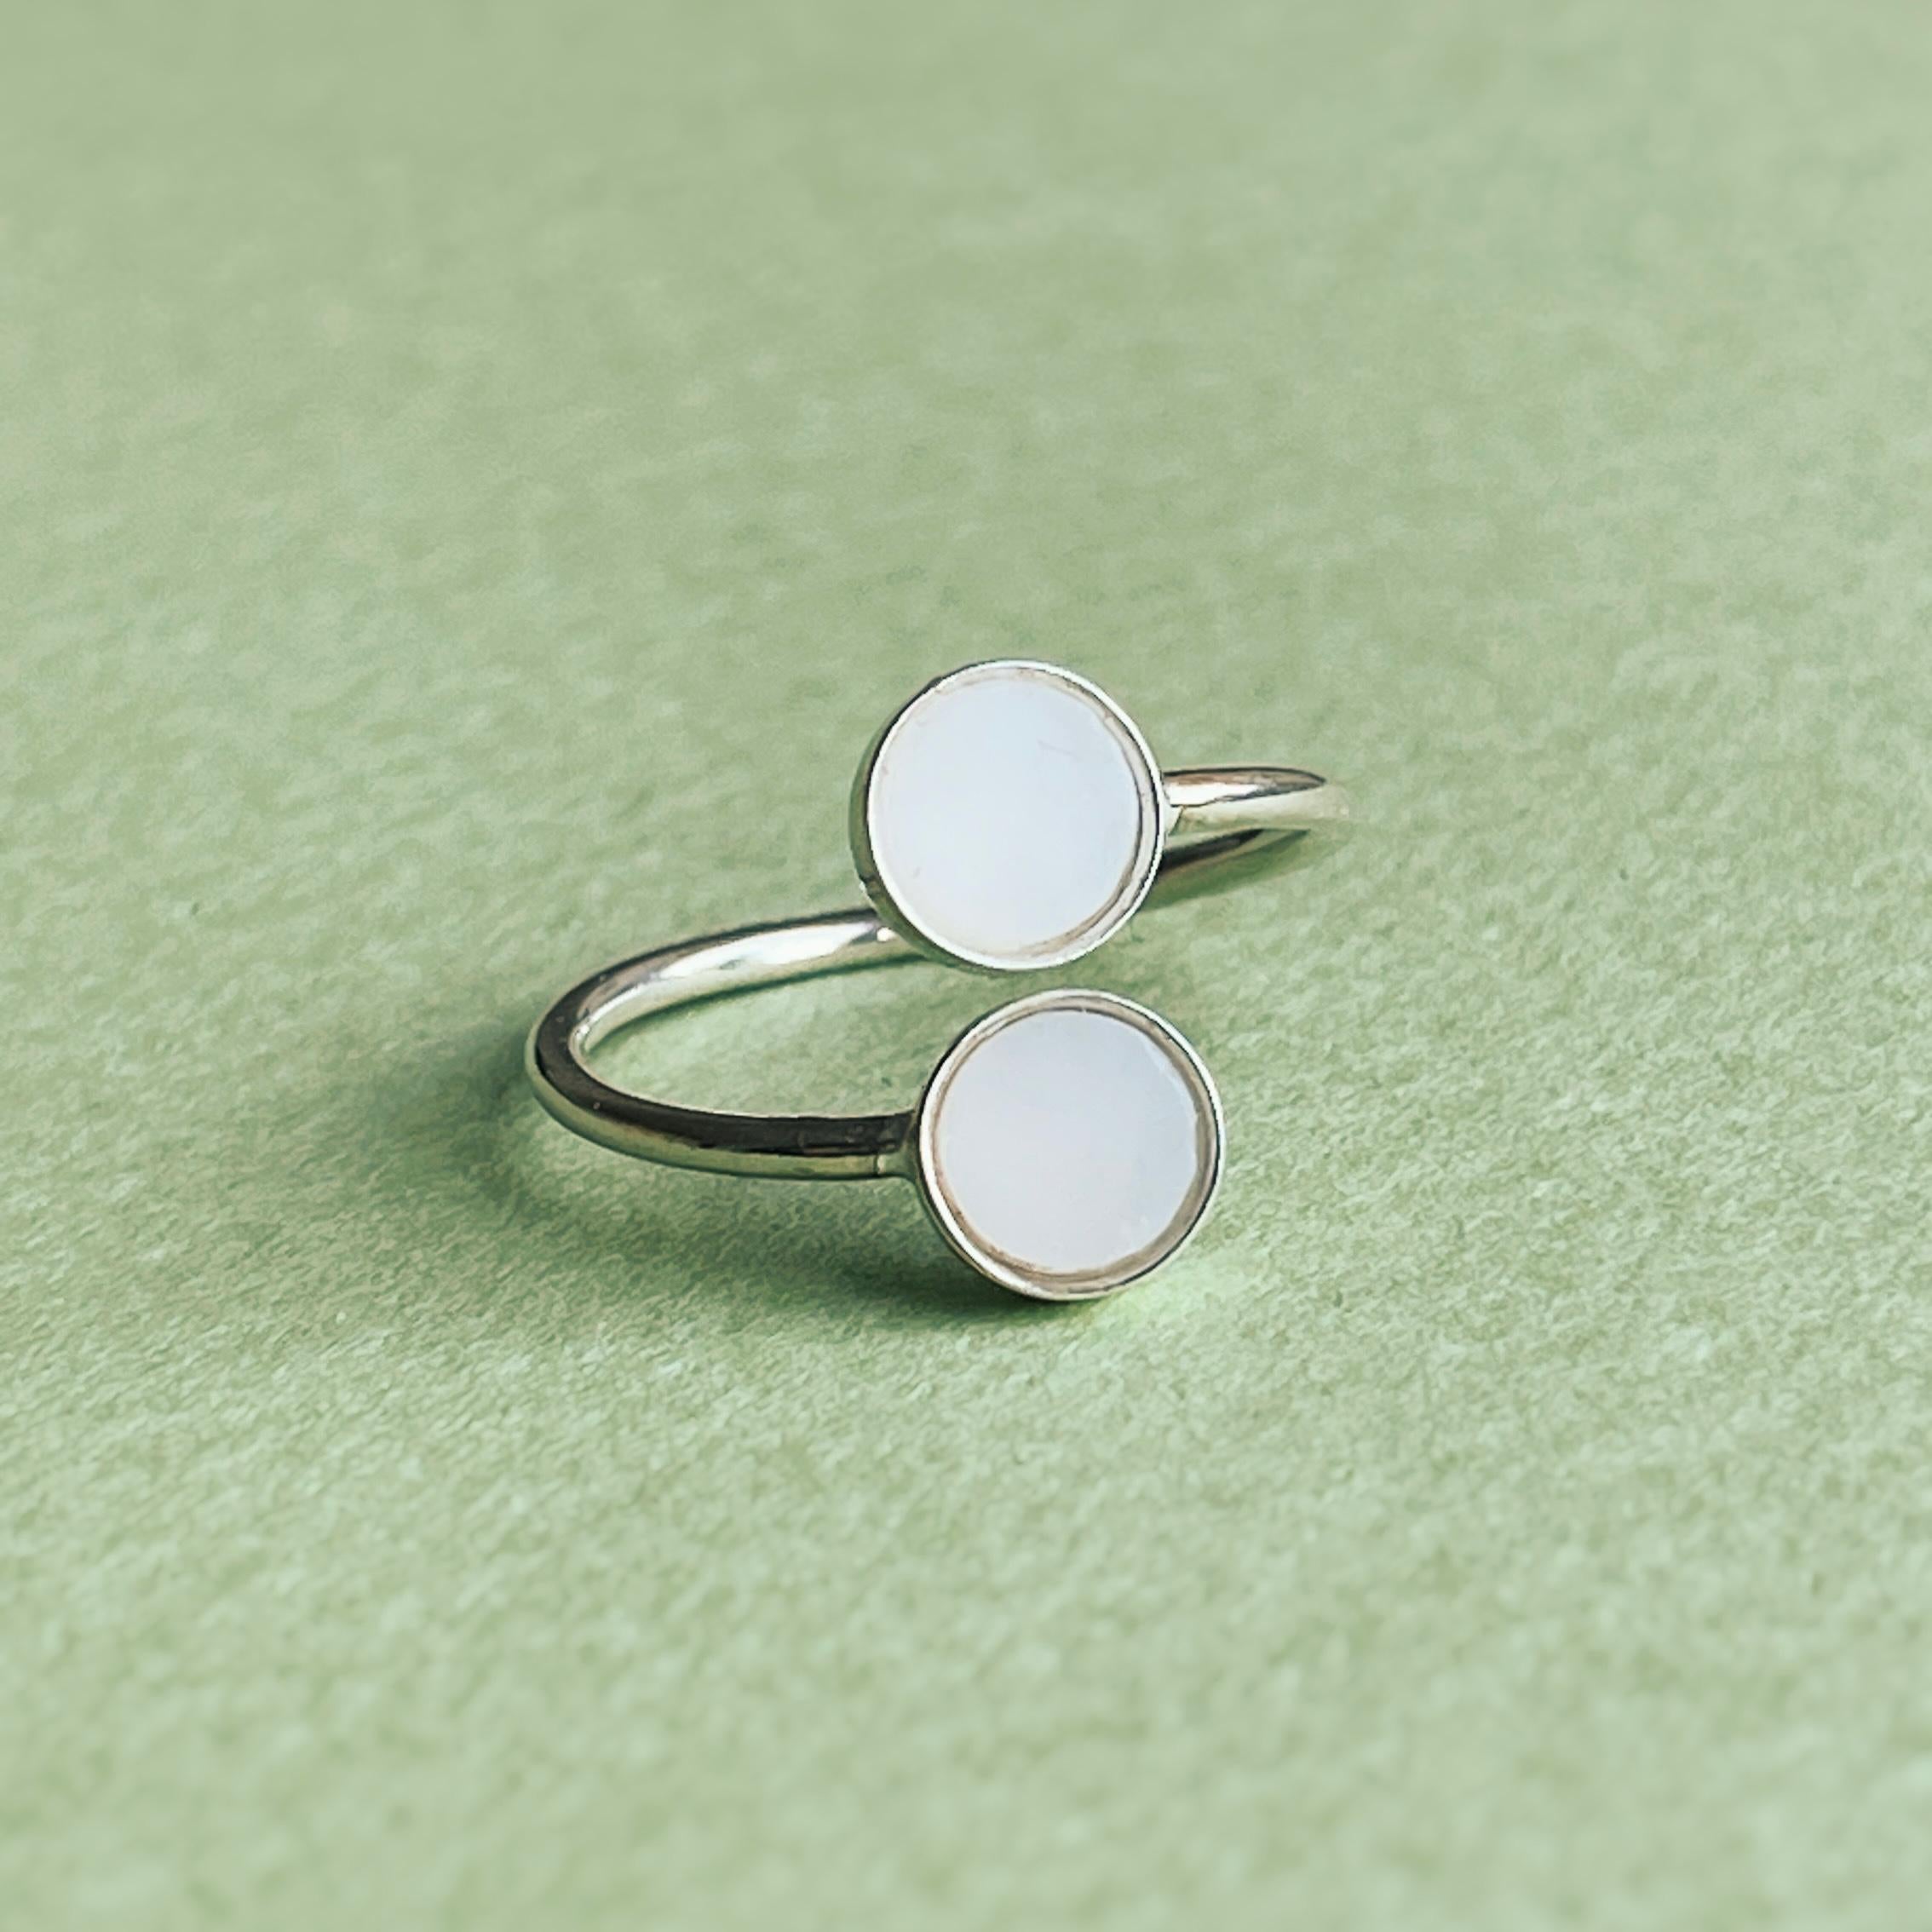 Elevate your style with our sterling silver ring featuring raw white opal stones. This adjustable ring offers both timeless elegance and personalized comfort for a truly unique accessory.
The ring is made of sterling silver. 
The diameter of the